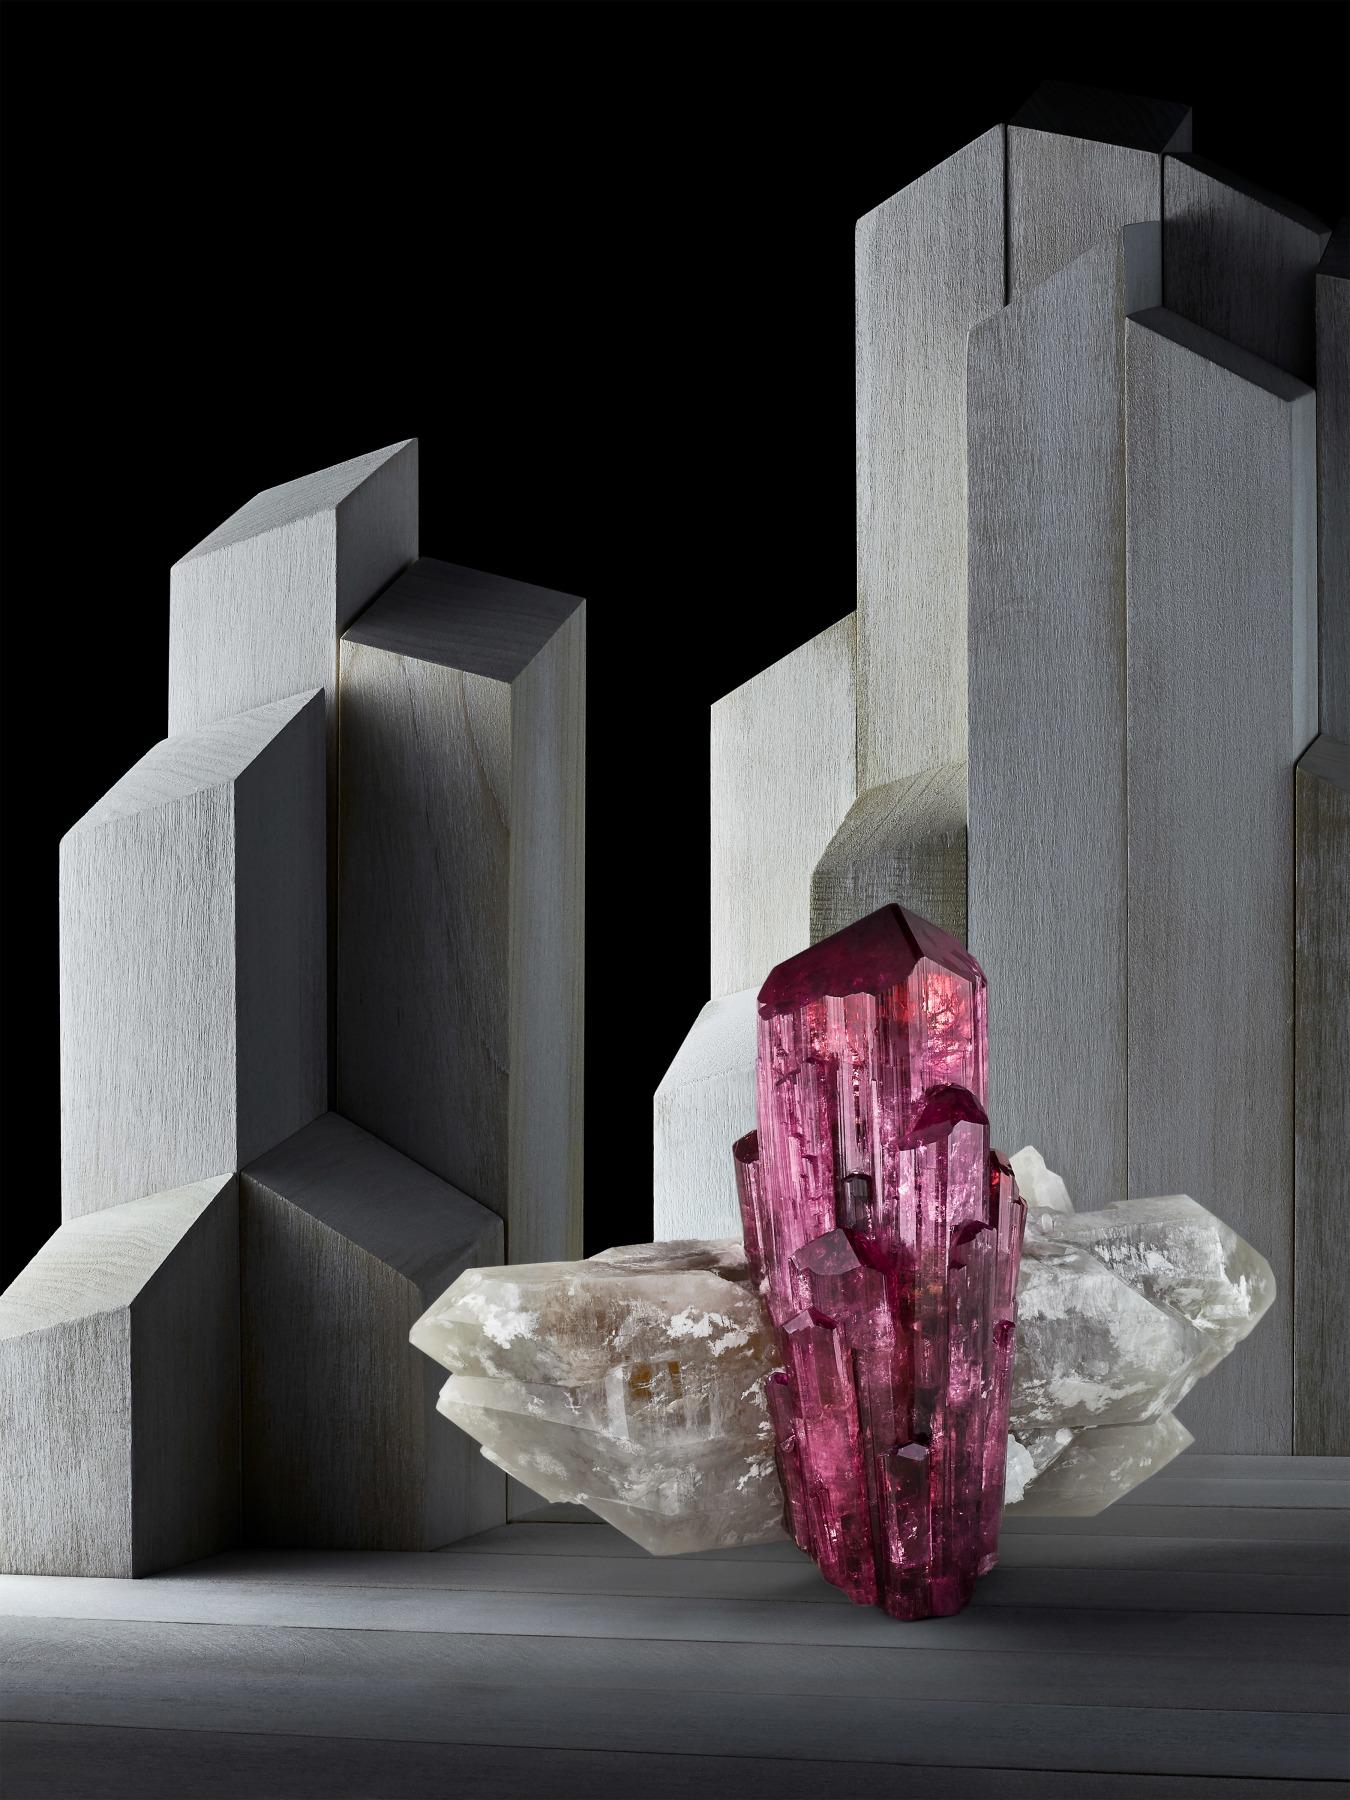 Rubellite Tourmaline on Quartz, Malkhan Pegmatite Field, Krasnyi Chikoy, Zabaykalsky Krai, Russia

Measures: 12.5 cm tall x 15 cm wide

All rubellite tourmaline is compared to the famous Jonas Mine in Brazil, which for the past 50 years has held